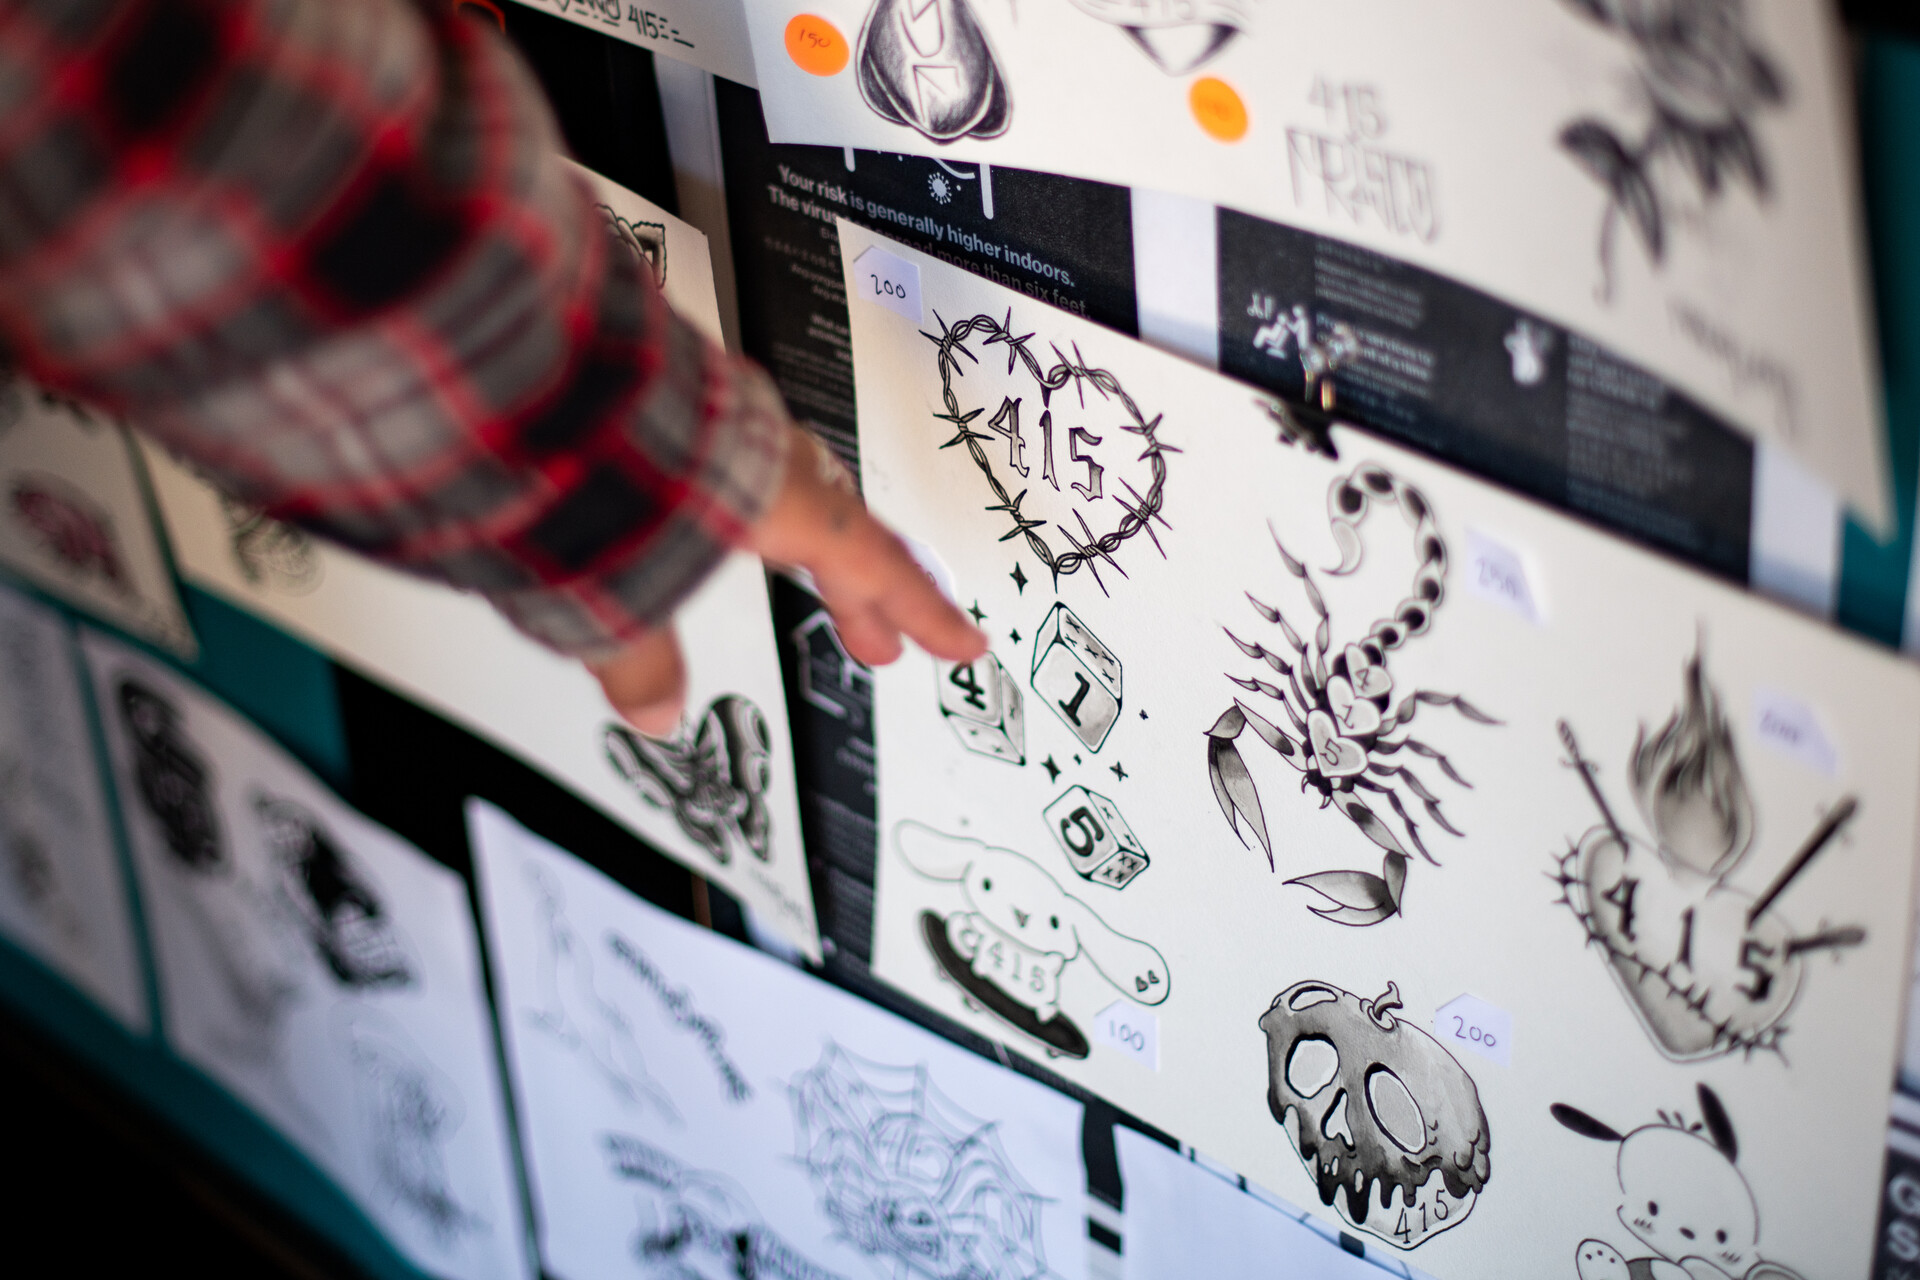 A hand points to sheets of tattoo designs hanging on the wall.  The designs feature 415 in honor of 415 Day.